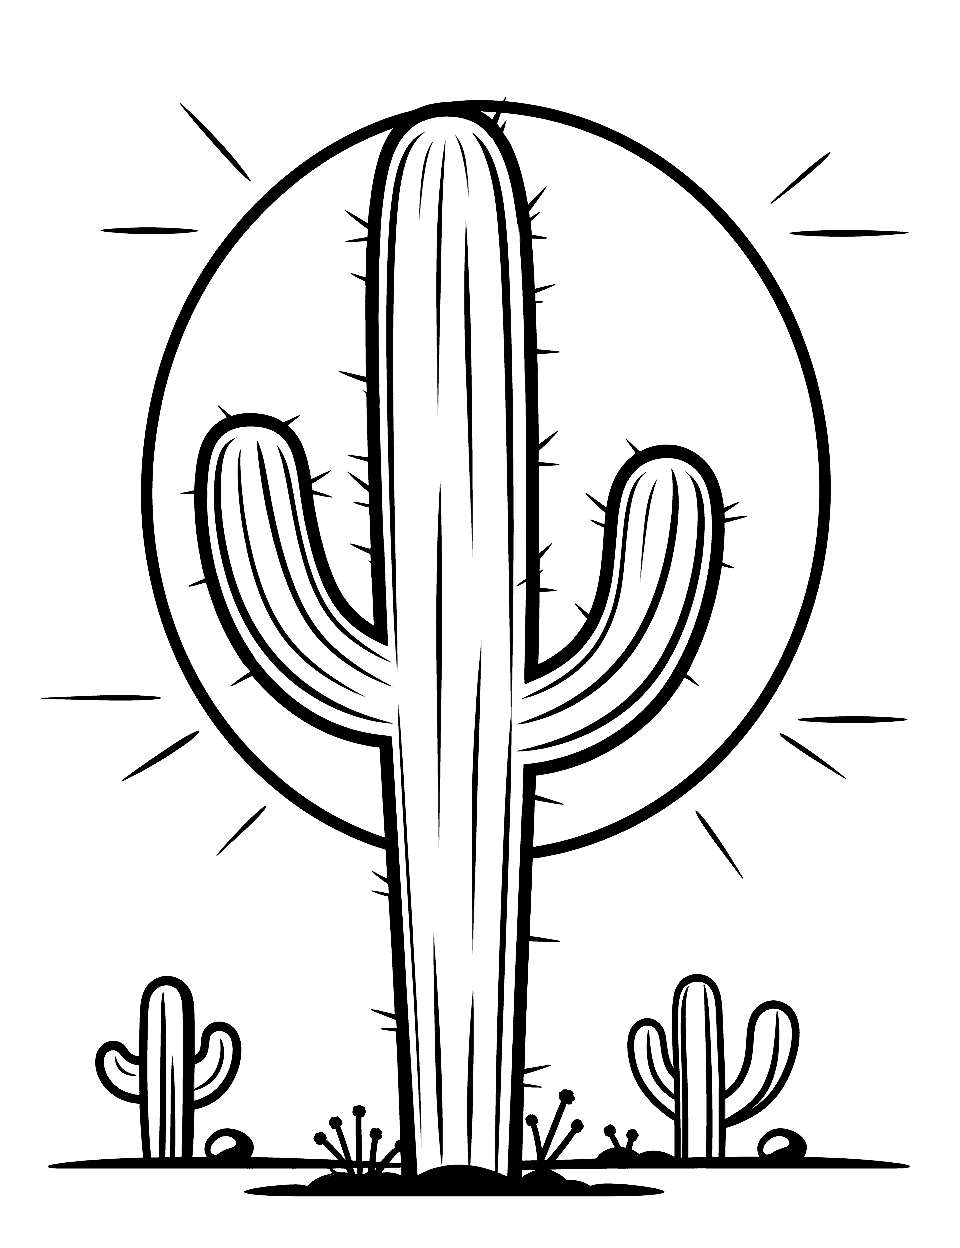 Simple Saguaro Silhouette Cactus Coloring Page - A basic outline of a towering Saguaro cactus against a setting sun.